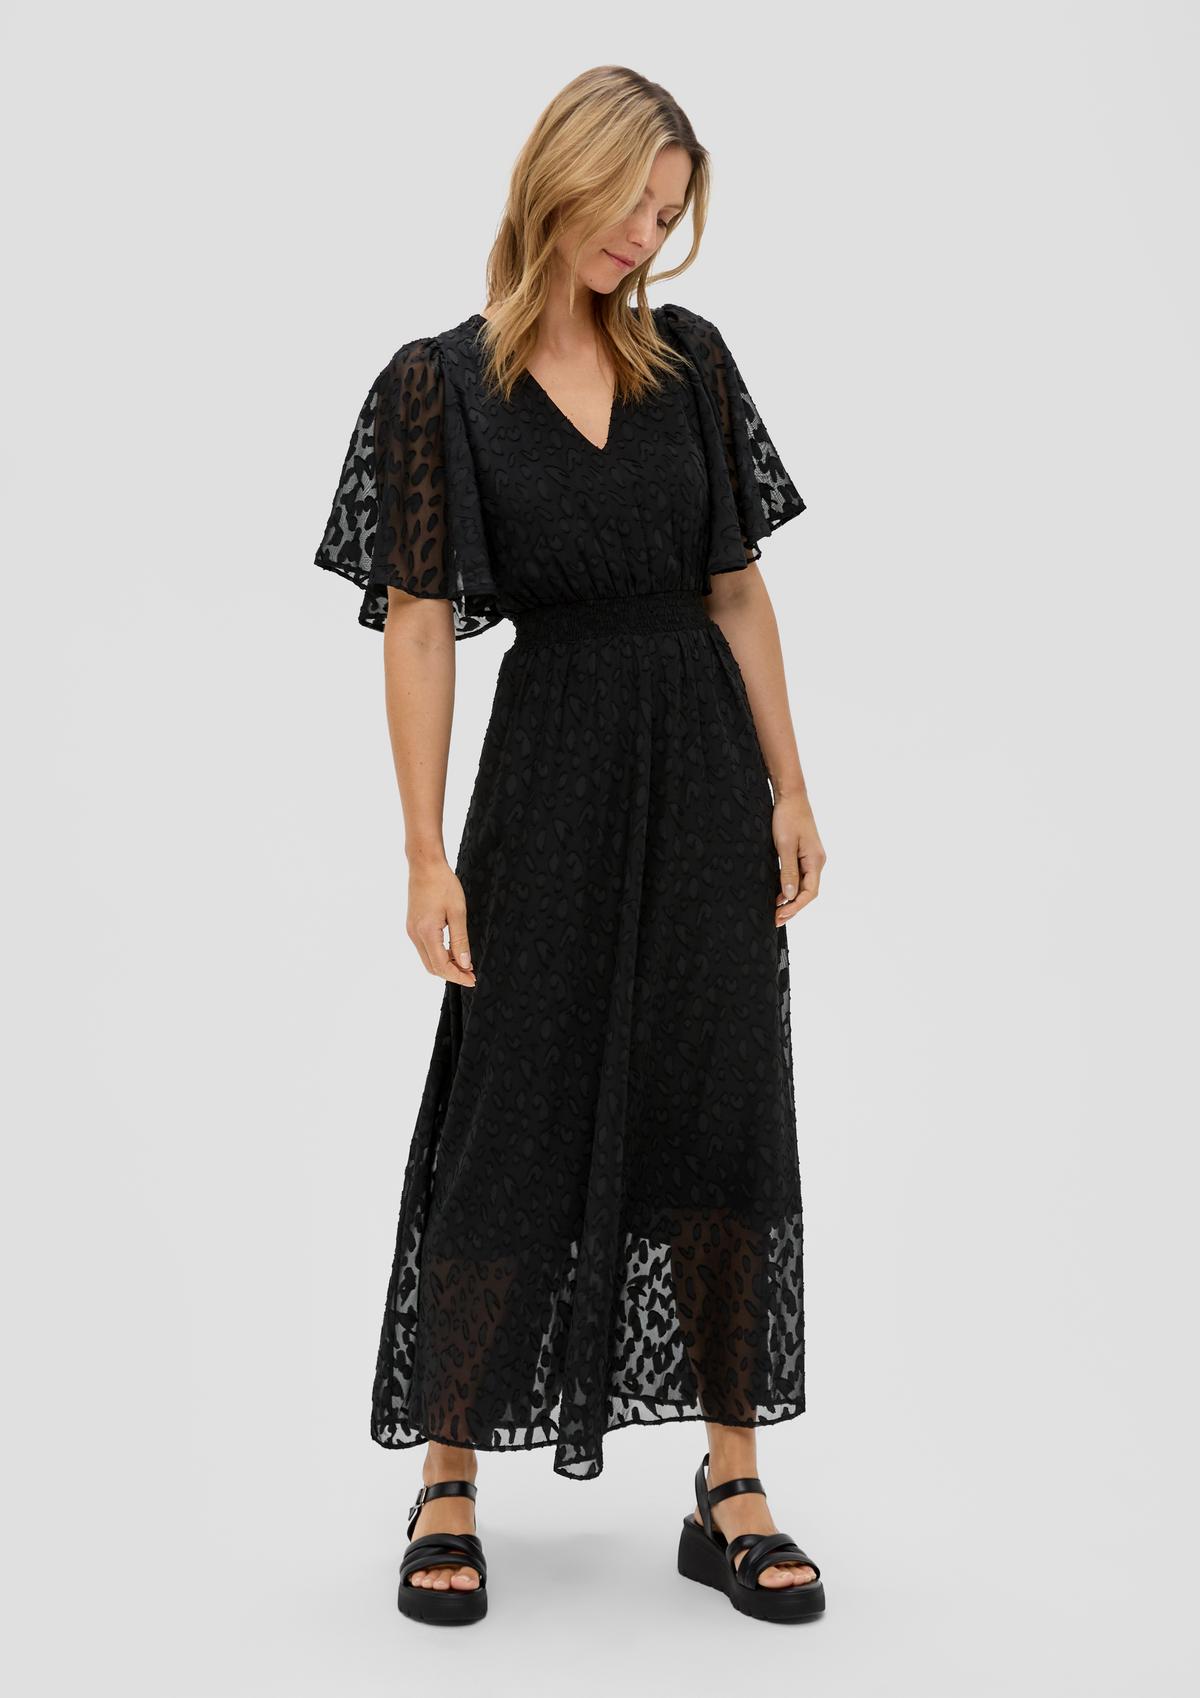 Chiffon dress with an all-over print